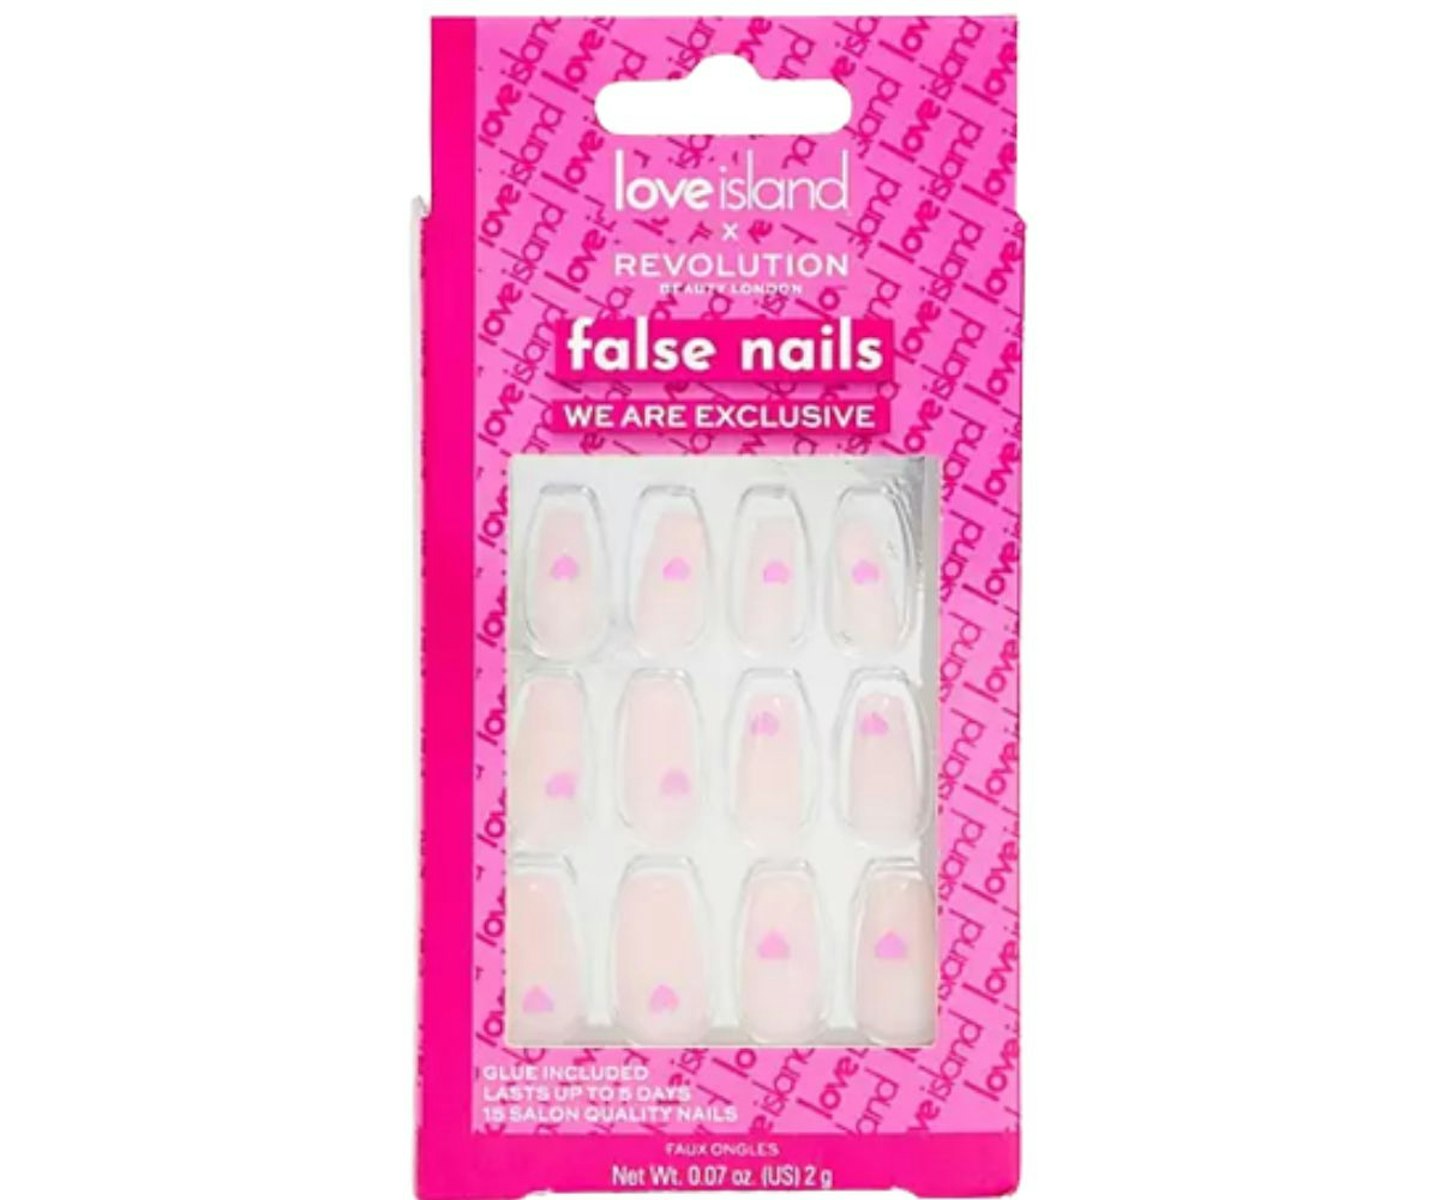 Revolution x Love Island False Nails - We Are Exclusive